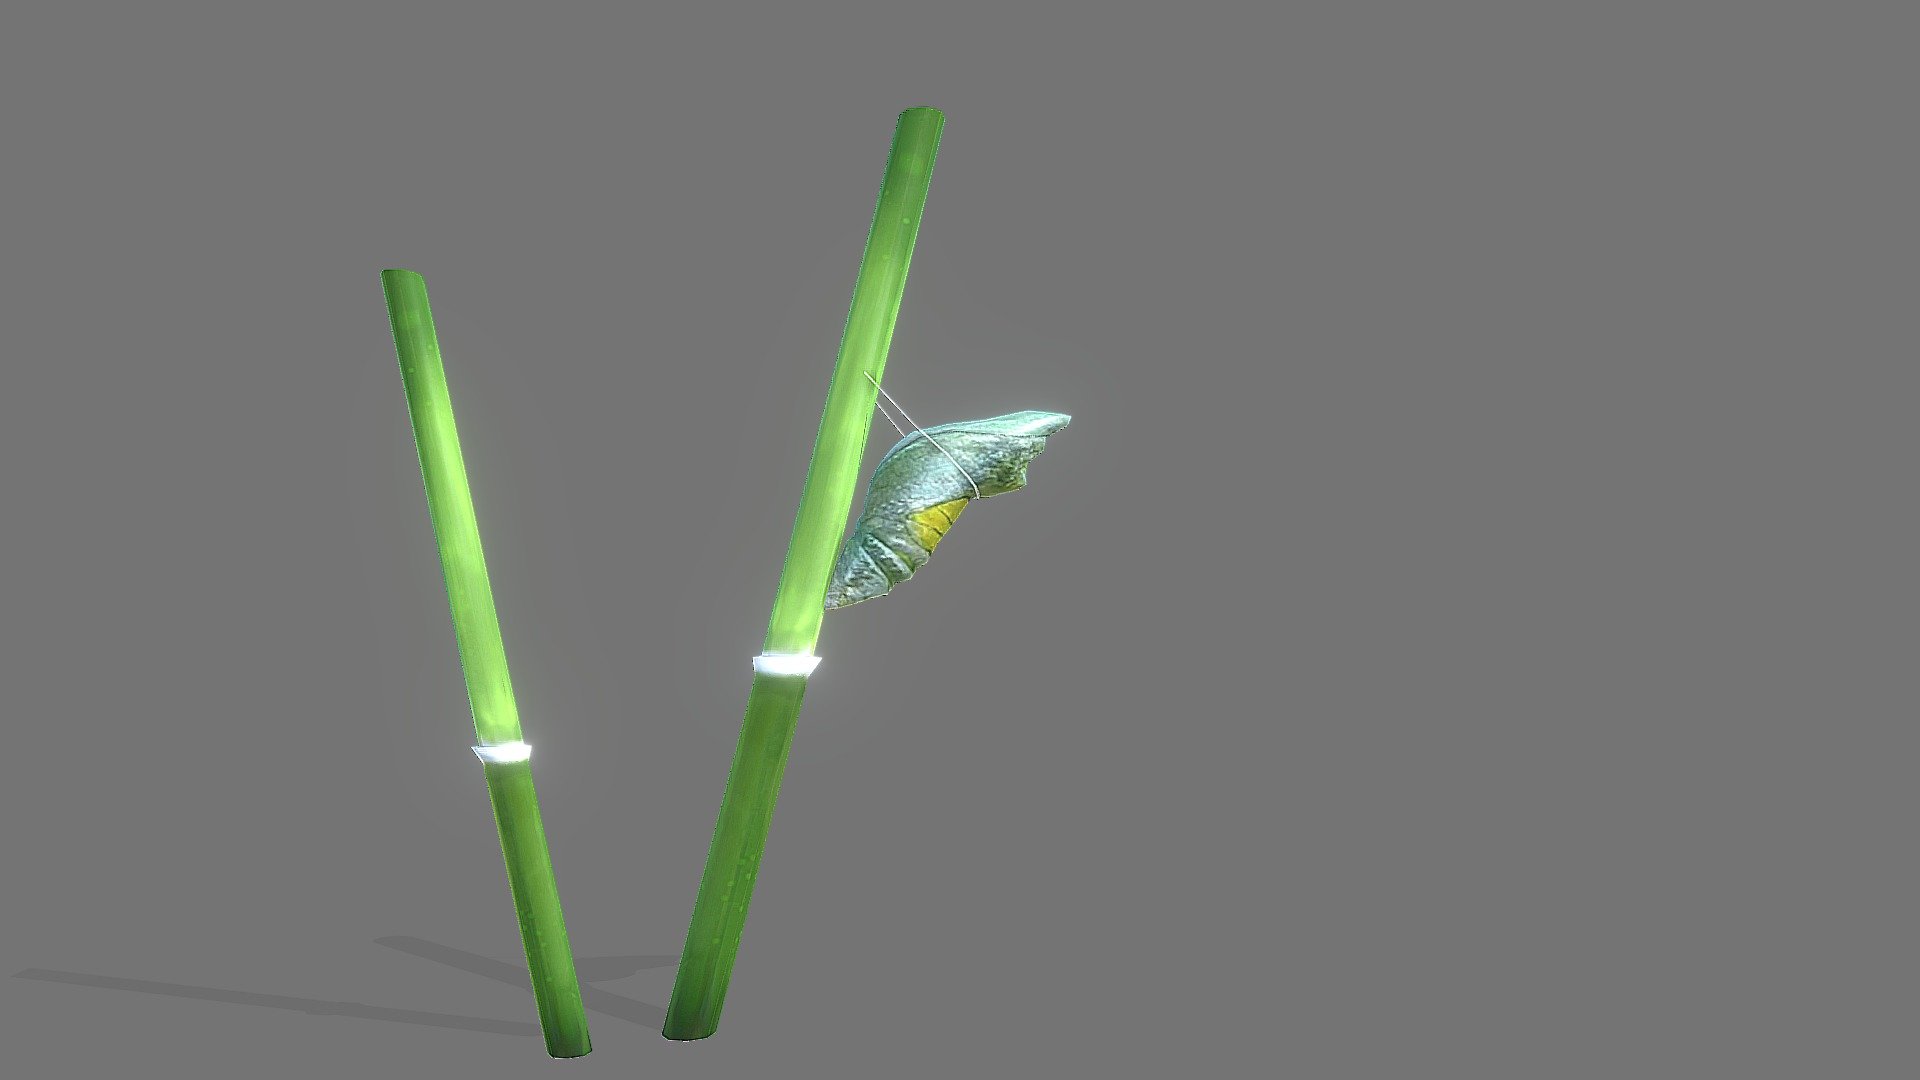 Welcome to the world of butterflies! This is a low poly 3D model of a butterfly and its lifecycle, ready for game, VR, and AR. You can explore the tow stages of metamorphosis: chrysalis, and adult. The model is optimized for performance and realism, with 2,000 polygons and 4K textures. It comes in FBX, OBJ, and GLTF formats.

Butterflies are amazing pollinators and indicators of environmental health. With this model, you can create beautiful and educational scenes that showcase the wonder and diversity of nature.

If you buy this model, you get a Royalty Free license to use it for any project, with credit. You also get free updates and support from me.

Thank you for your interest and support. I hope you like this model and find it useful. Please rate and comment on Sketchfab. You can also check out my other models or follow me on Sketchfab - Butterfly - Buy Royalty Free 3D model by 7SkyArtist 3d model